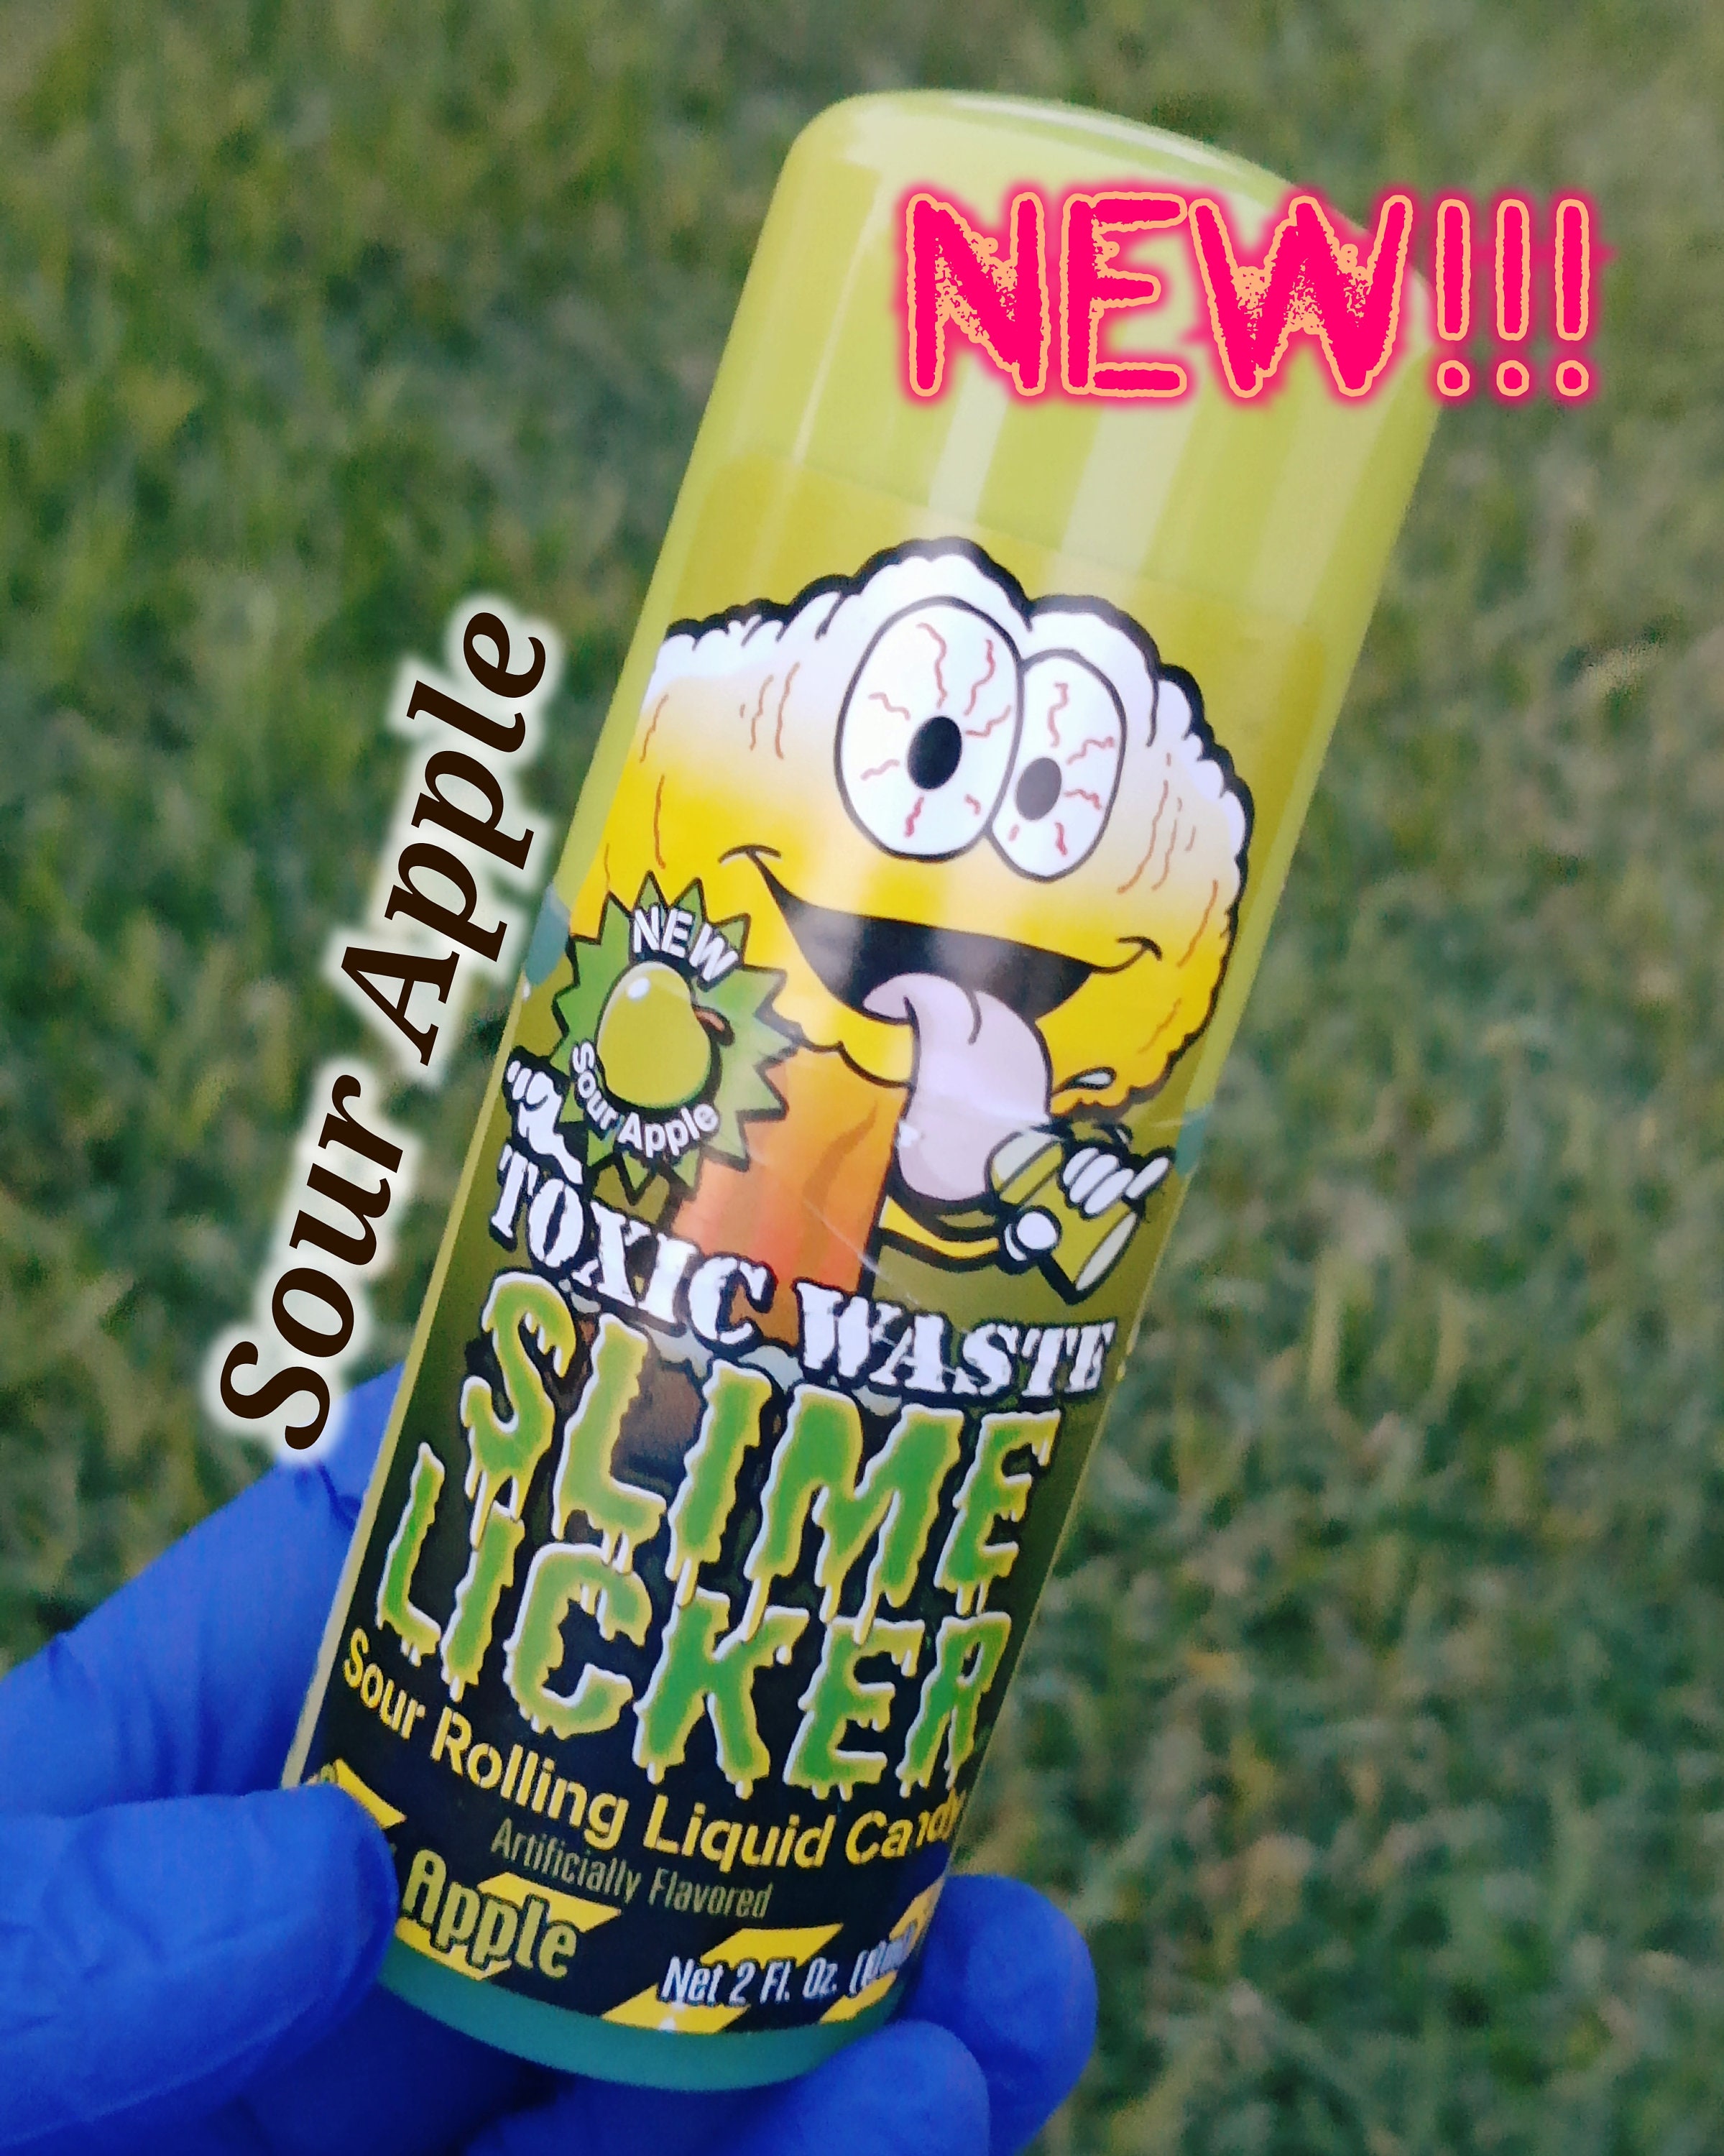 Toxic Waste Slime Licker Sour Rolling Liquid Candy, Variety 4-Pack 2 oz.  Bottles 